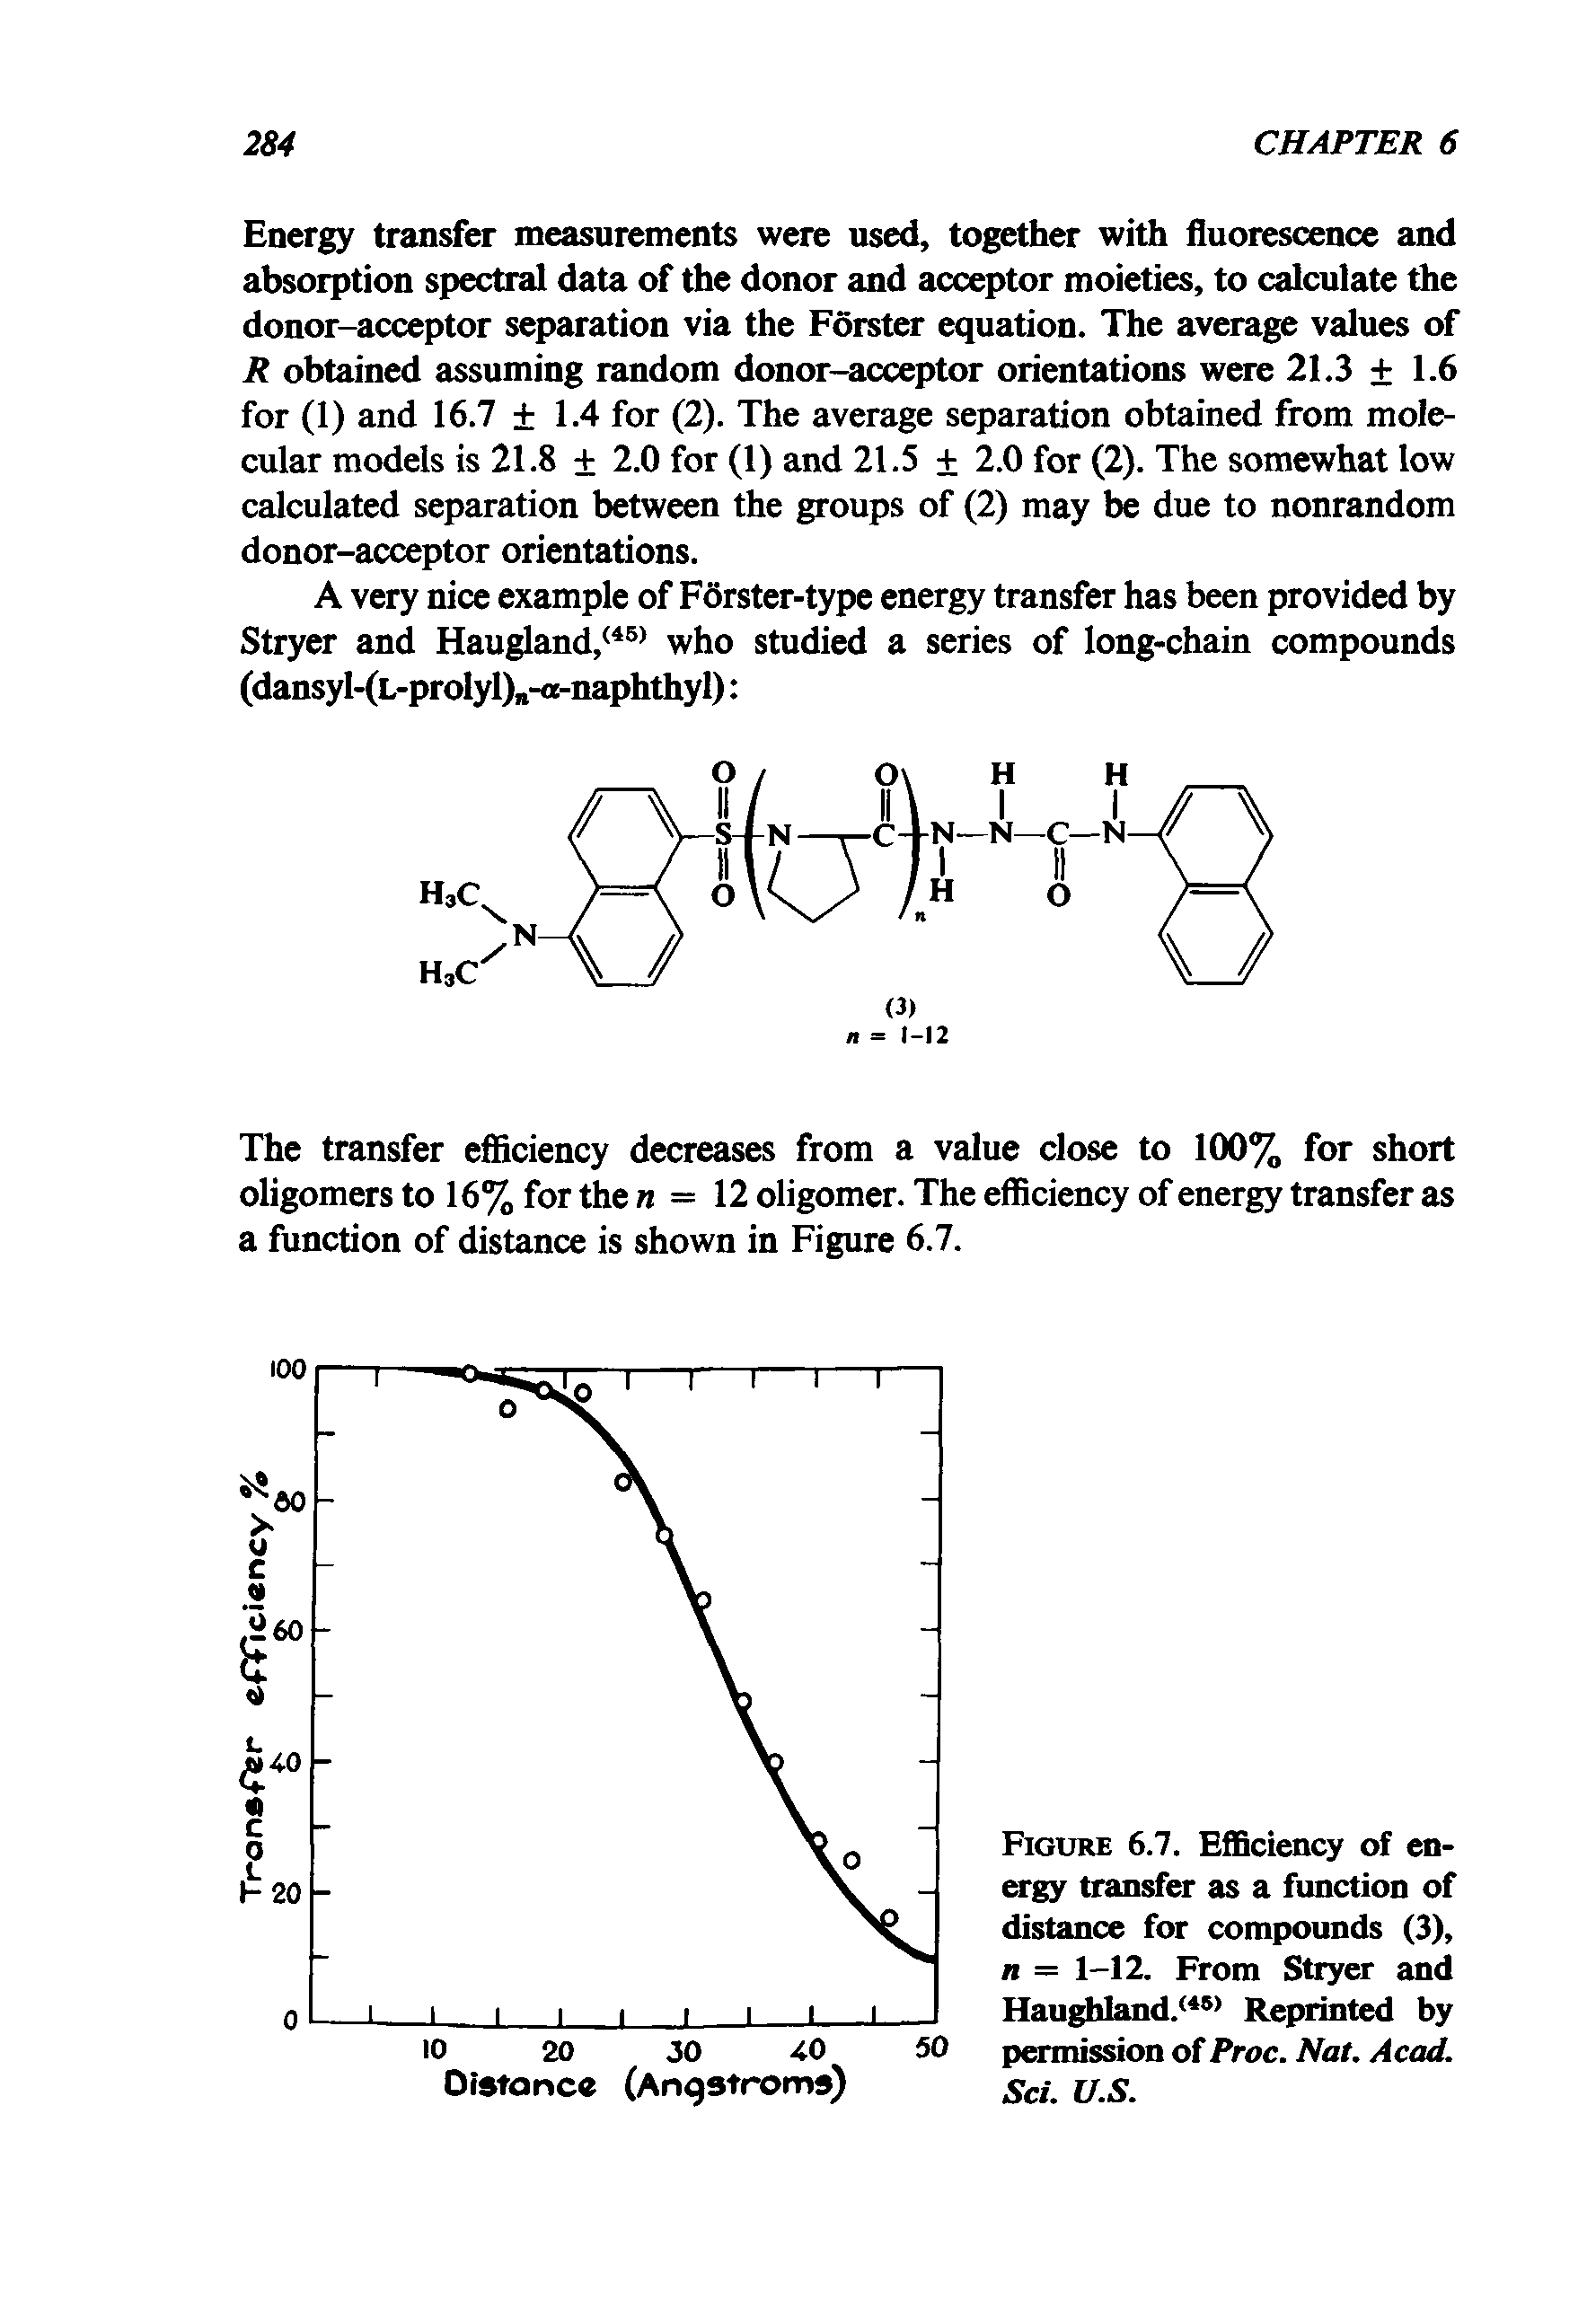 Figure 6.7. Efficiency of energy transfer as a function of distance for compounds (3), n = 1-12. From Stryer and Haughland.<45) Reprinted by permission of Proc. Nat. Acad. Sci. U.S.